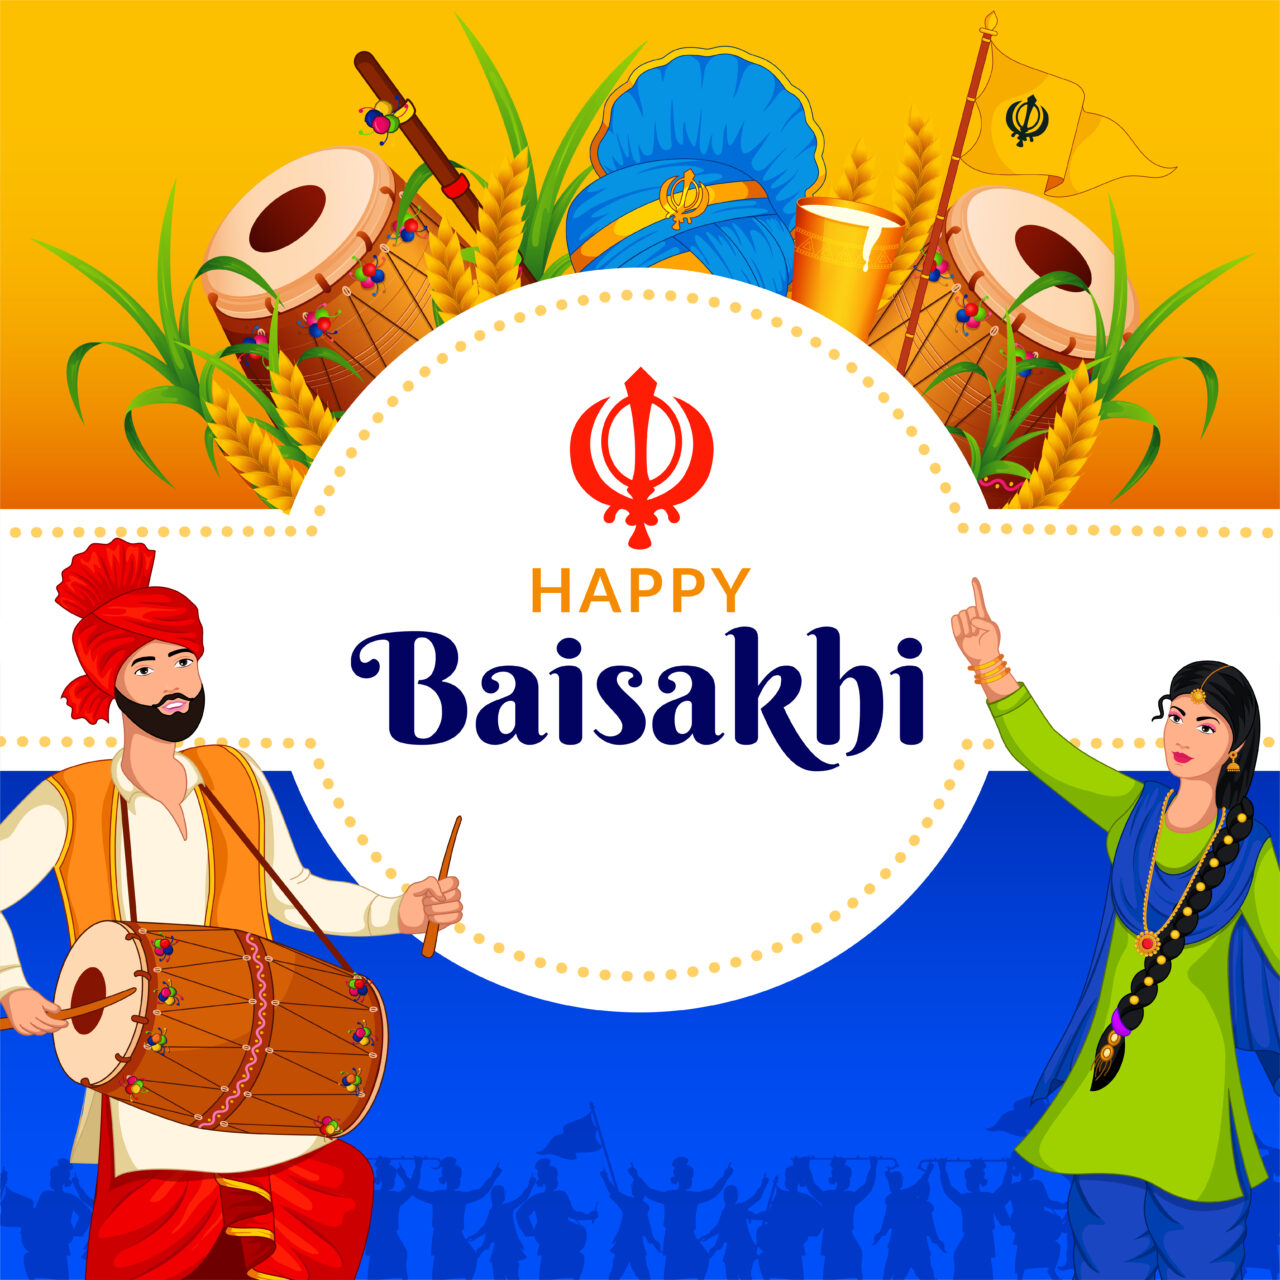 Vaisakhi Festival: A Multicultural Marketing Opportunity for Businesses in Canada￼